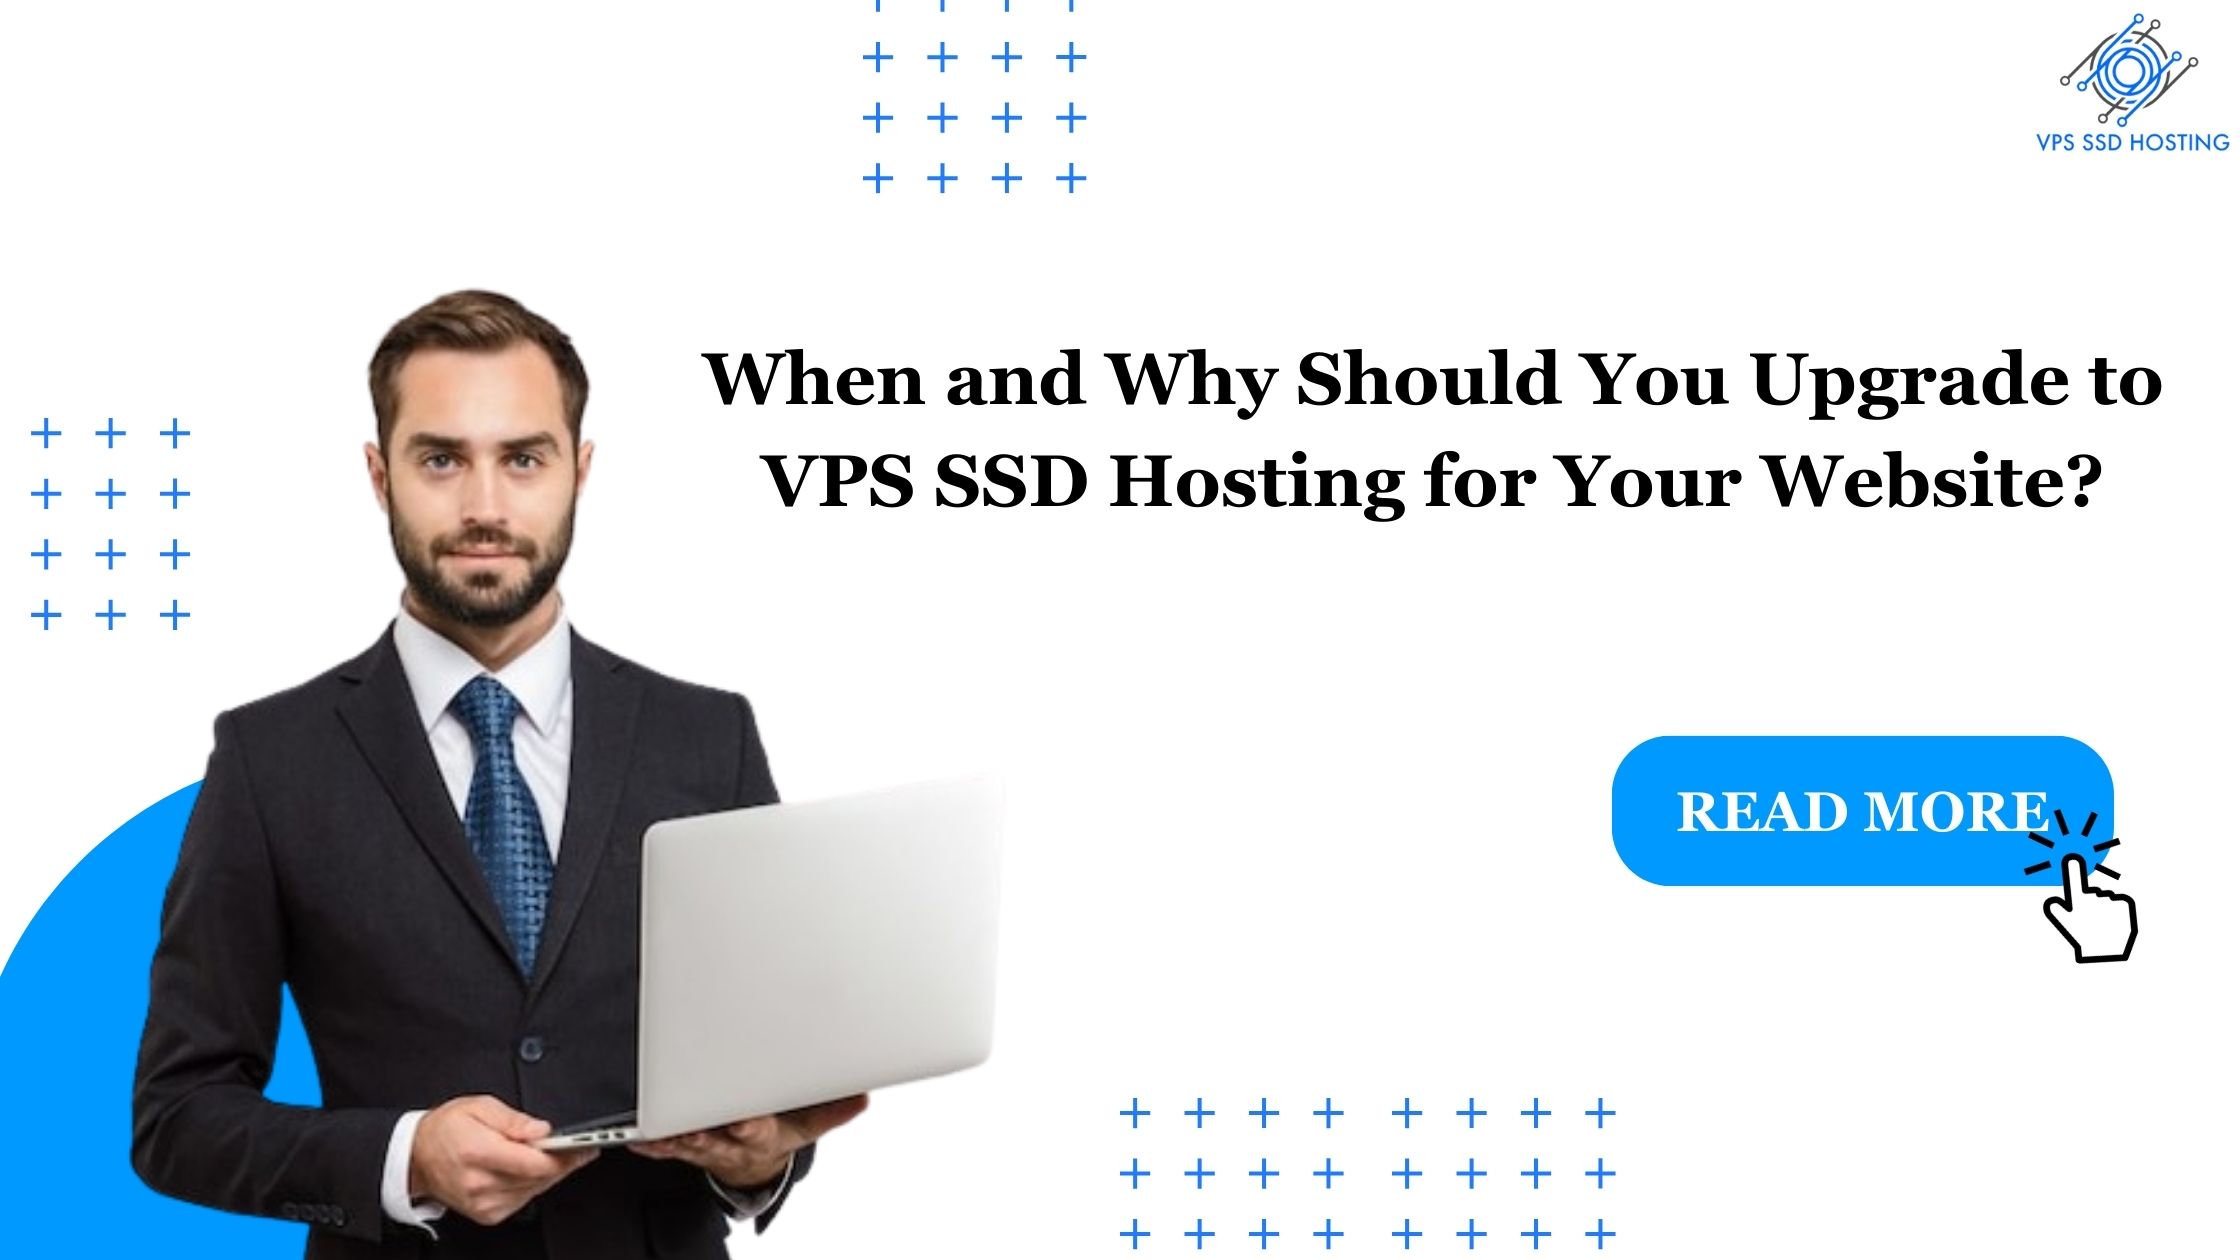 When and Why Should You Upgrade to VPS SSD Hosting for Your Website?